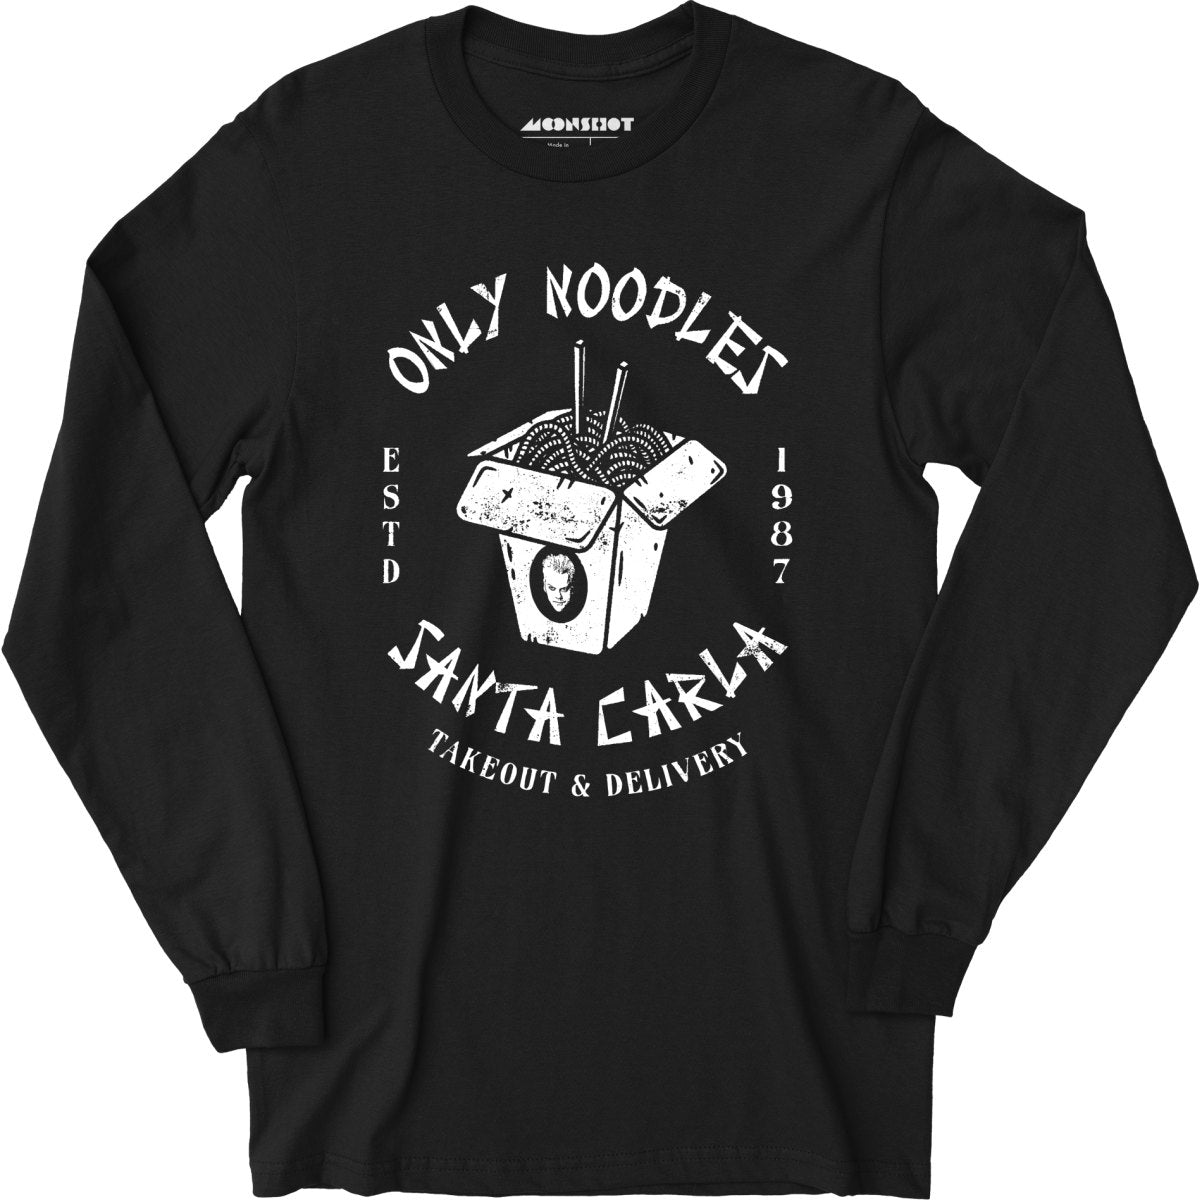 Only Noodles Takeout & Delivery - Santa Carla - Long Sleeve T-Shirt